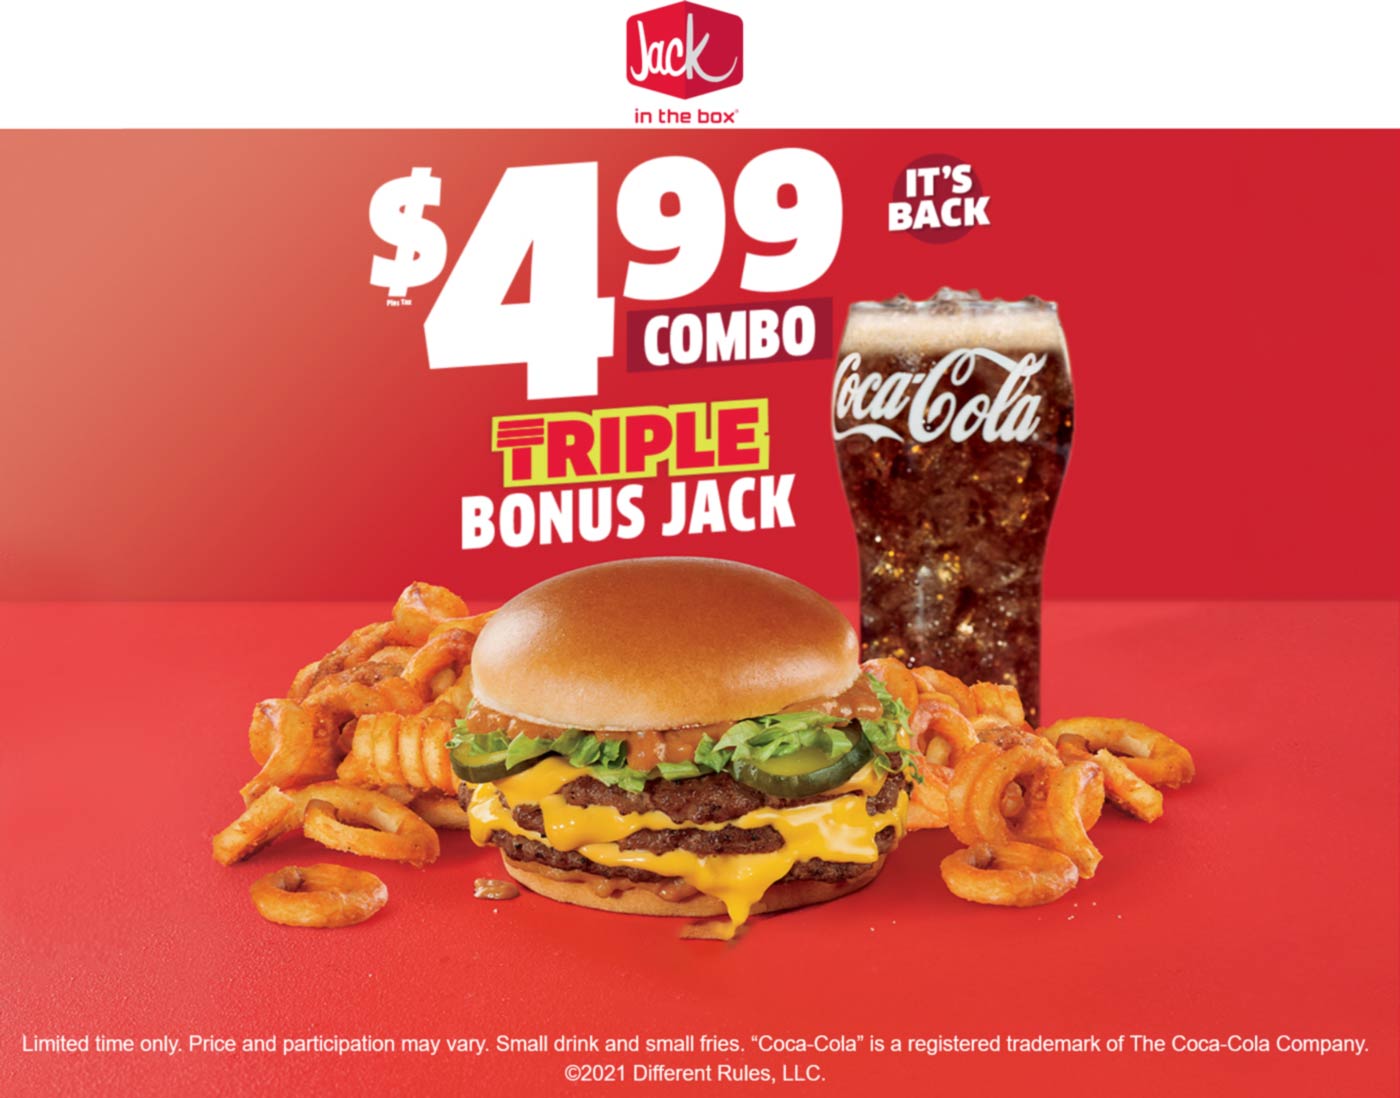 Jack in the Box restaurants Coupon  Triple cheeseburger + curly fries + drink = $5 combo meal at Jack in the Box #jackinthebox 